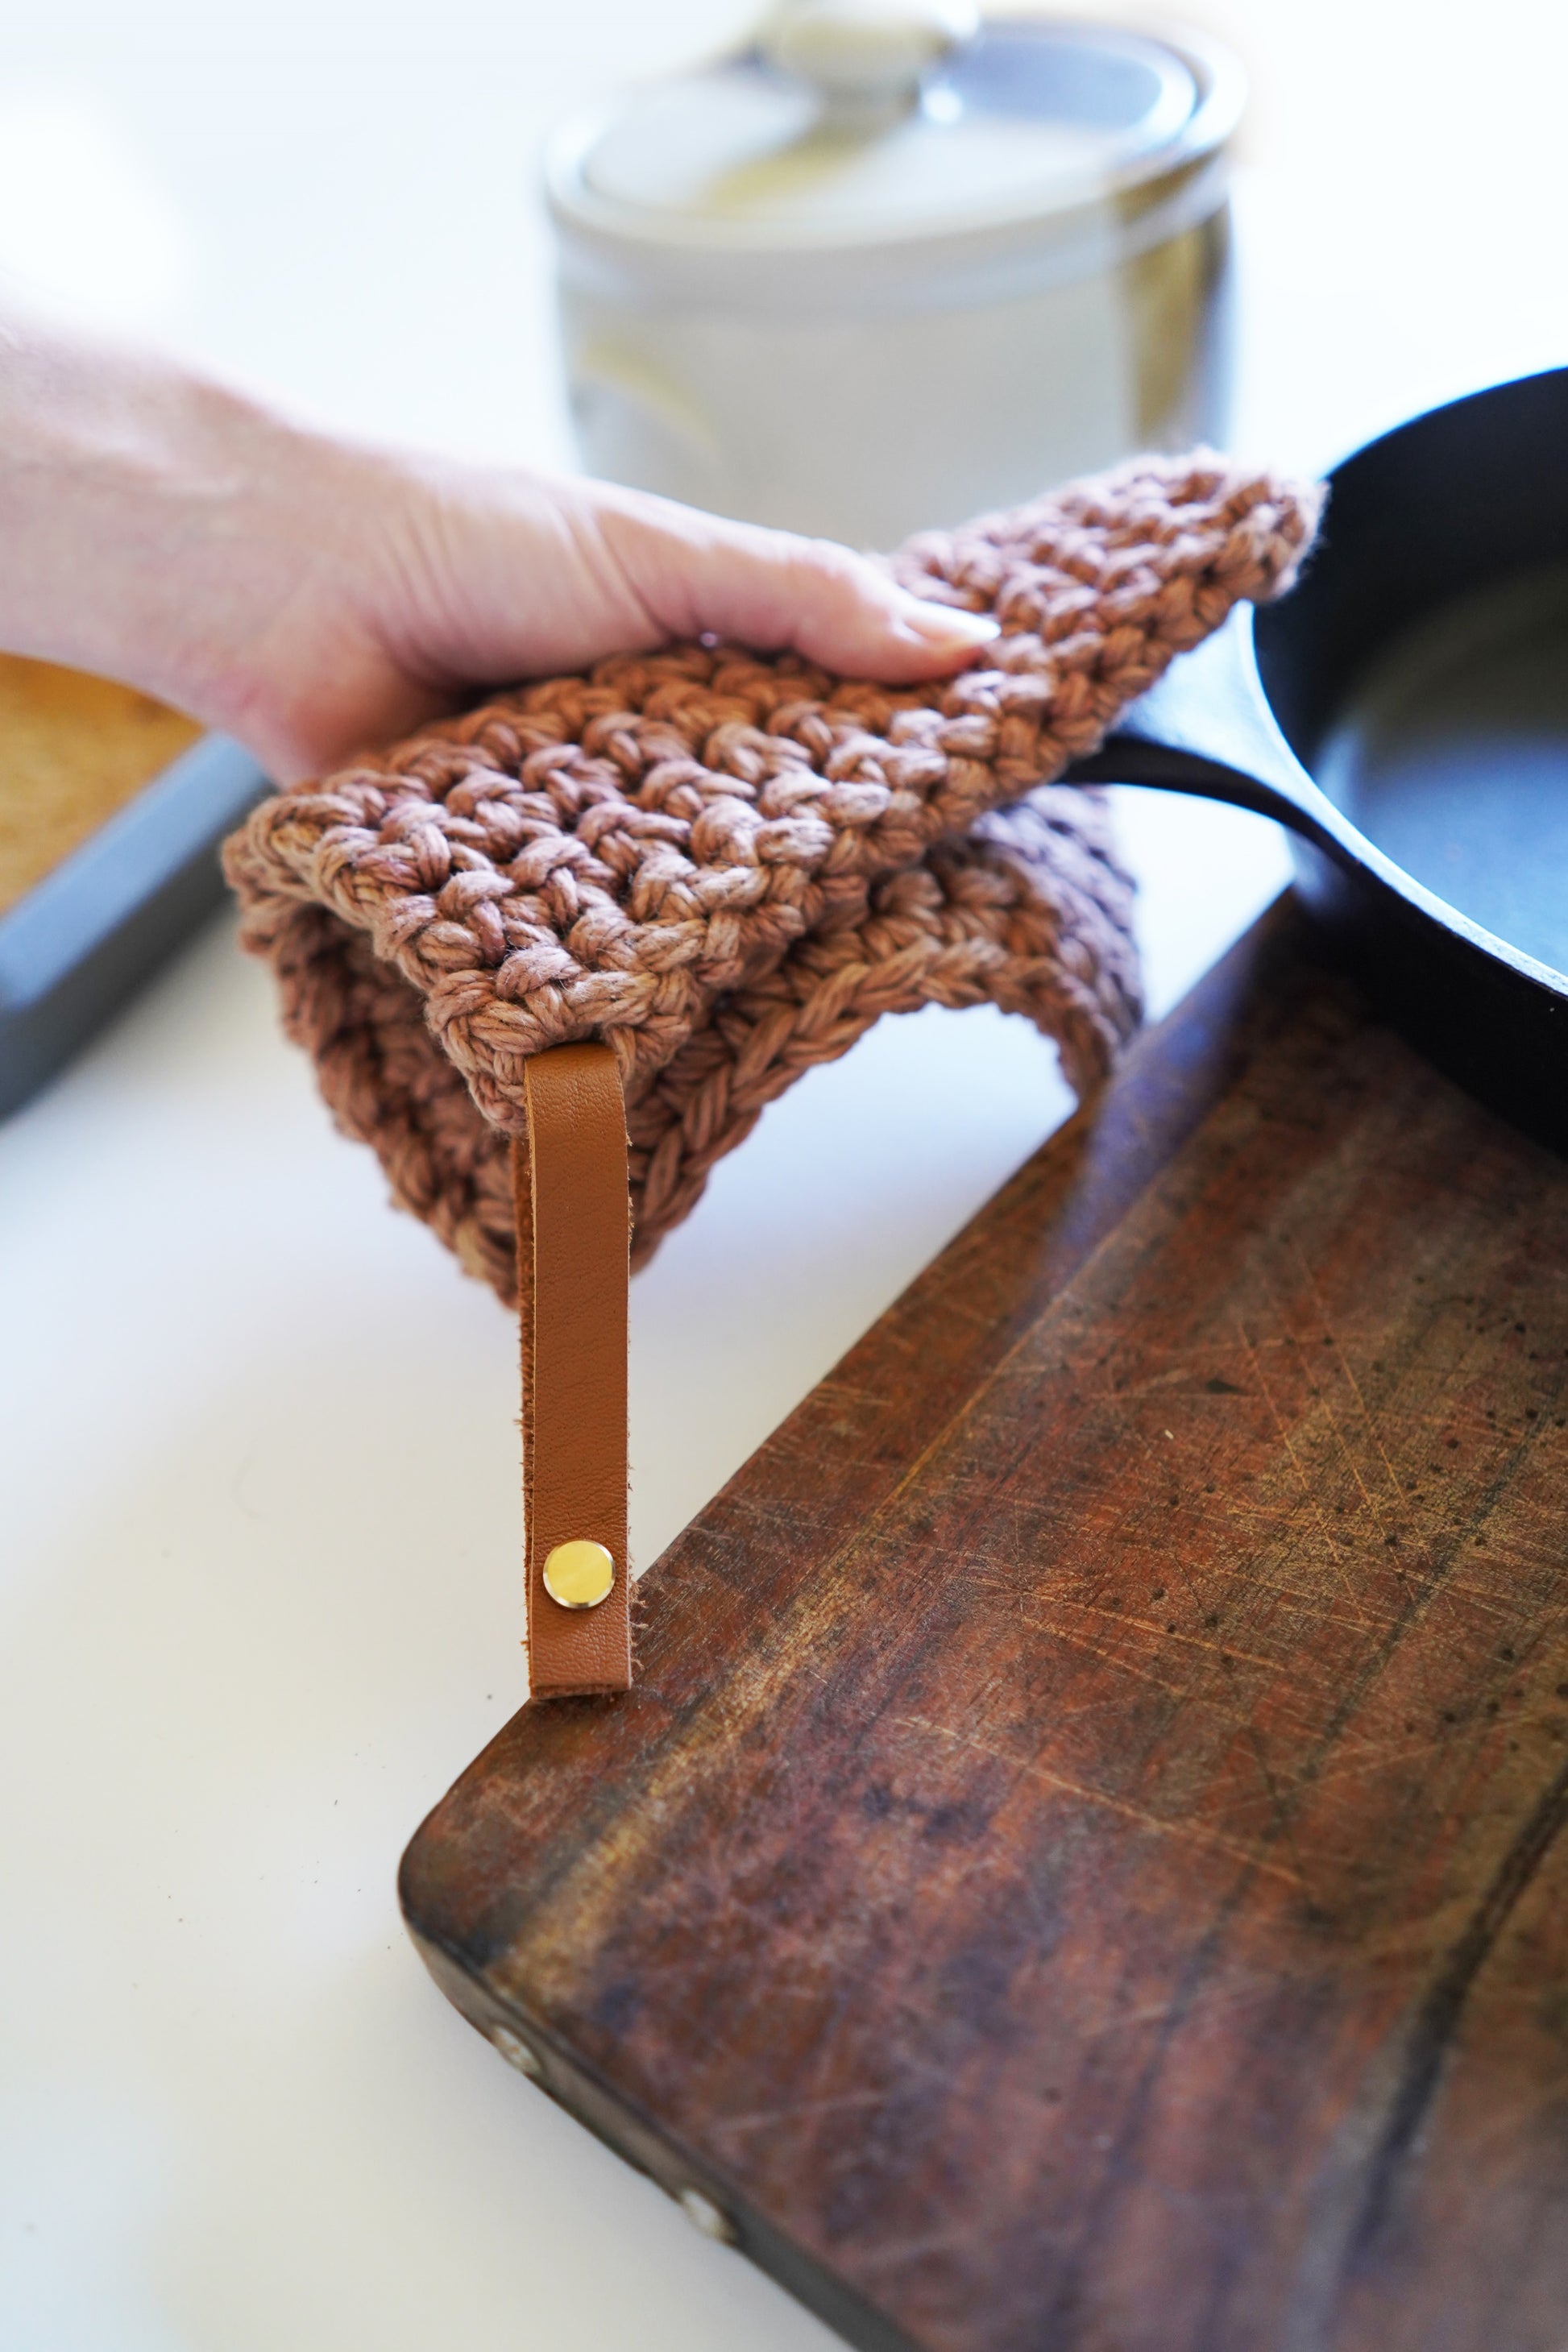 Leather Cast Iron Pan Handle Cover, Leather Pan Holder Leather Pot Holder 